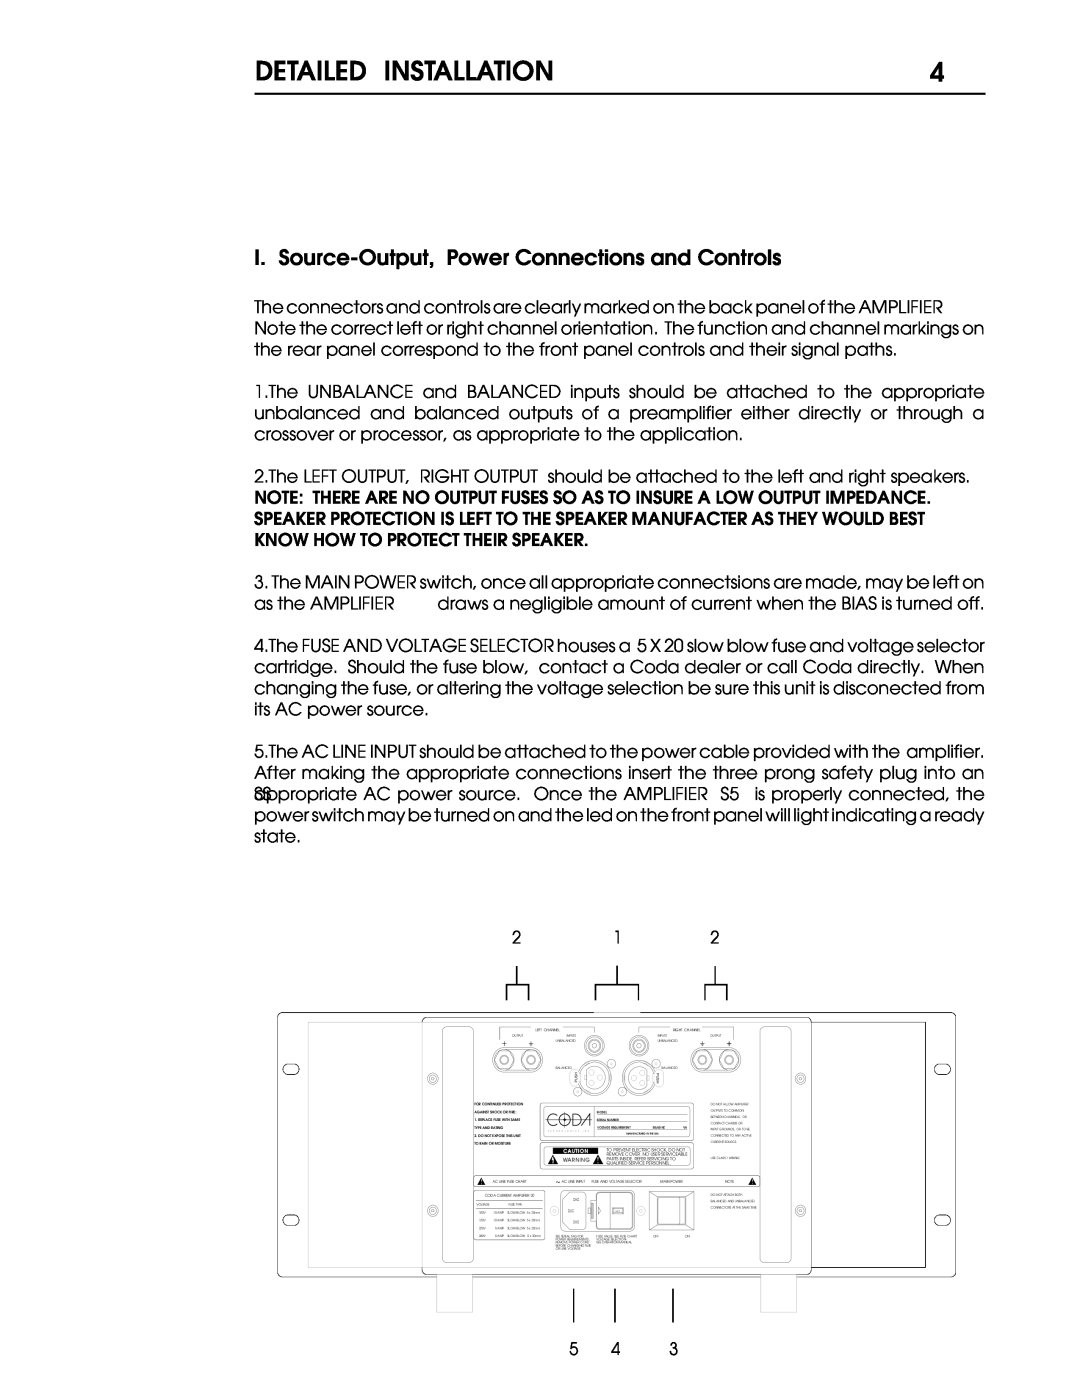 Coda S5 operation manual I. Source-Output,Power Connections and Controls 